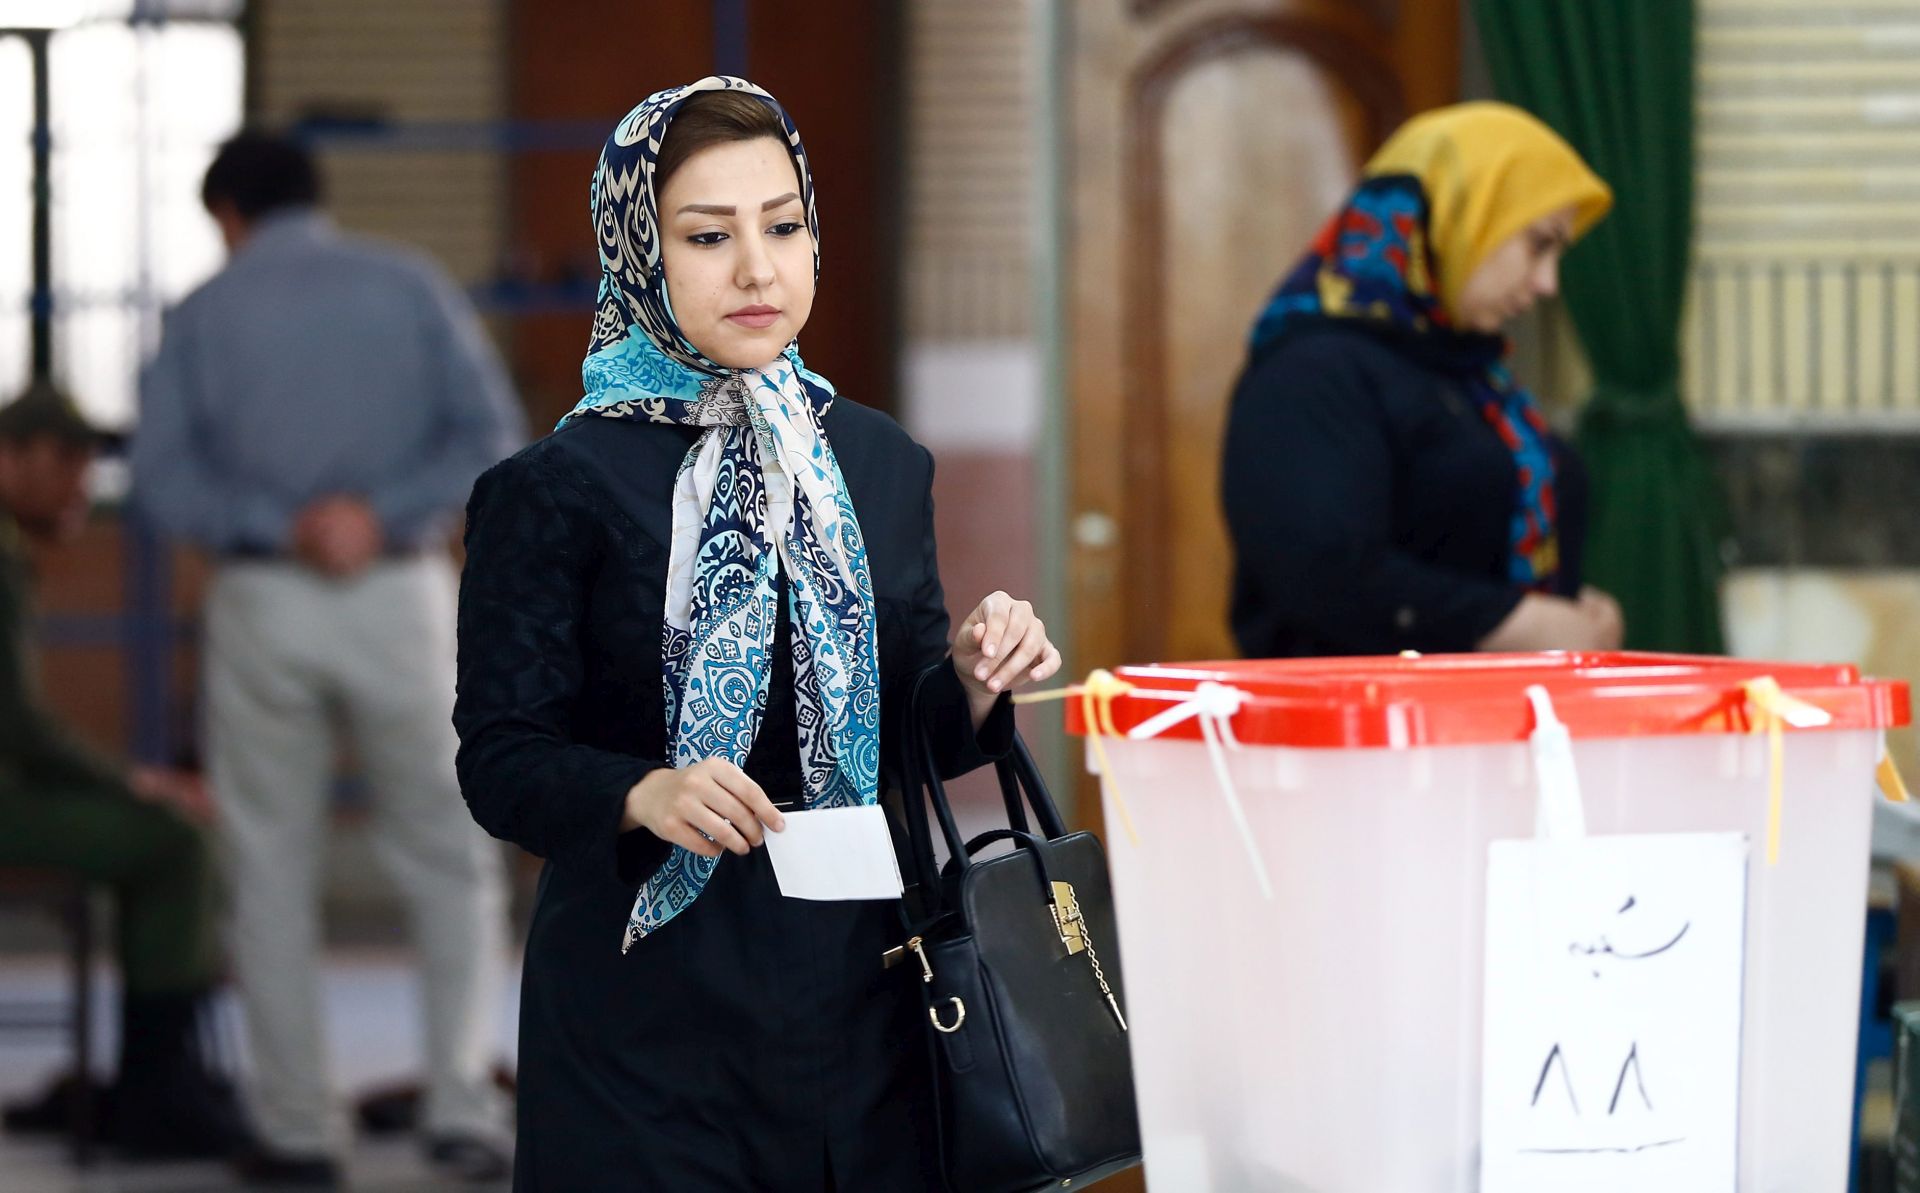 epa05282669 An Iranian woman holds her ballot paper at a polling station during the second round of parliamentary elections at the Jameh Mosque in the city of Shahre Ghods, Iran, 29 April 2016. Polling stations opened in Iran on 29 April for the second round of parliamentary elections, in which 136 candidates are competing for 68 seats still vacant after the 26 February polls.  EPA/ABEDIN TAHERKENAREH